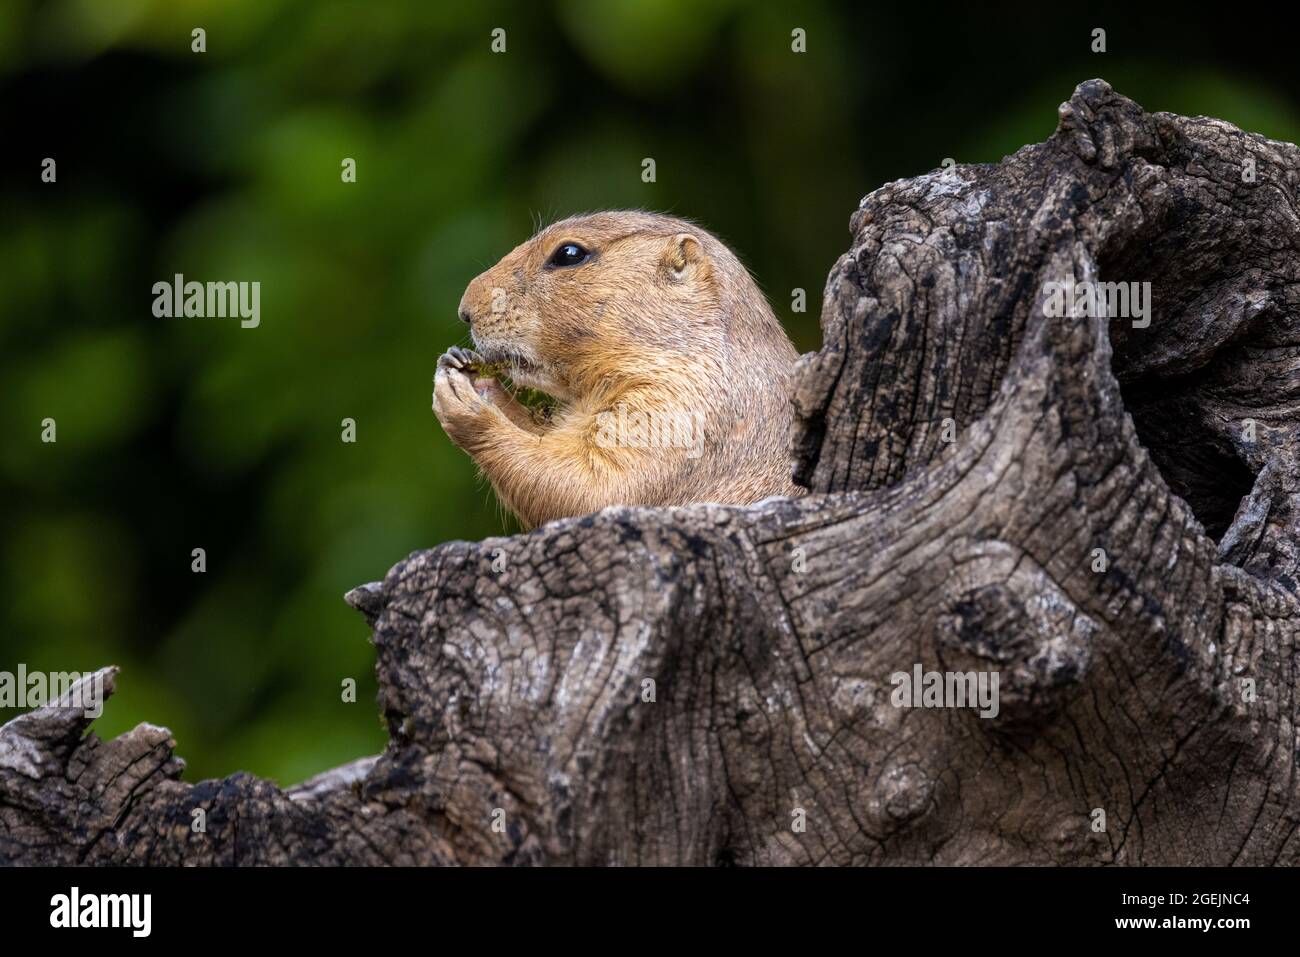 Close up profile portrait of a prairie dog, partially hidden by a dead tree trunk, eating a morsel, against a green bokeh background Stock Photo